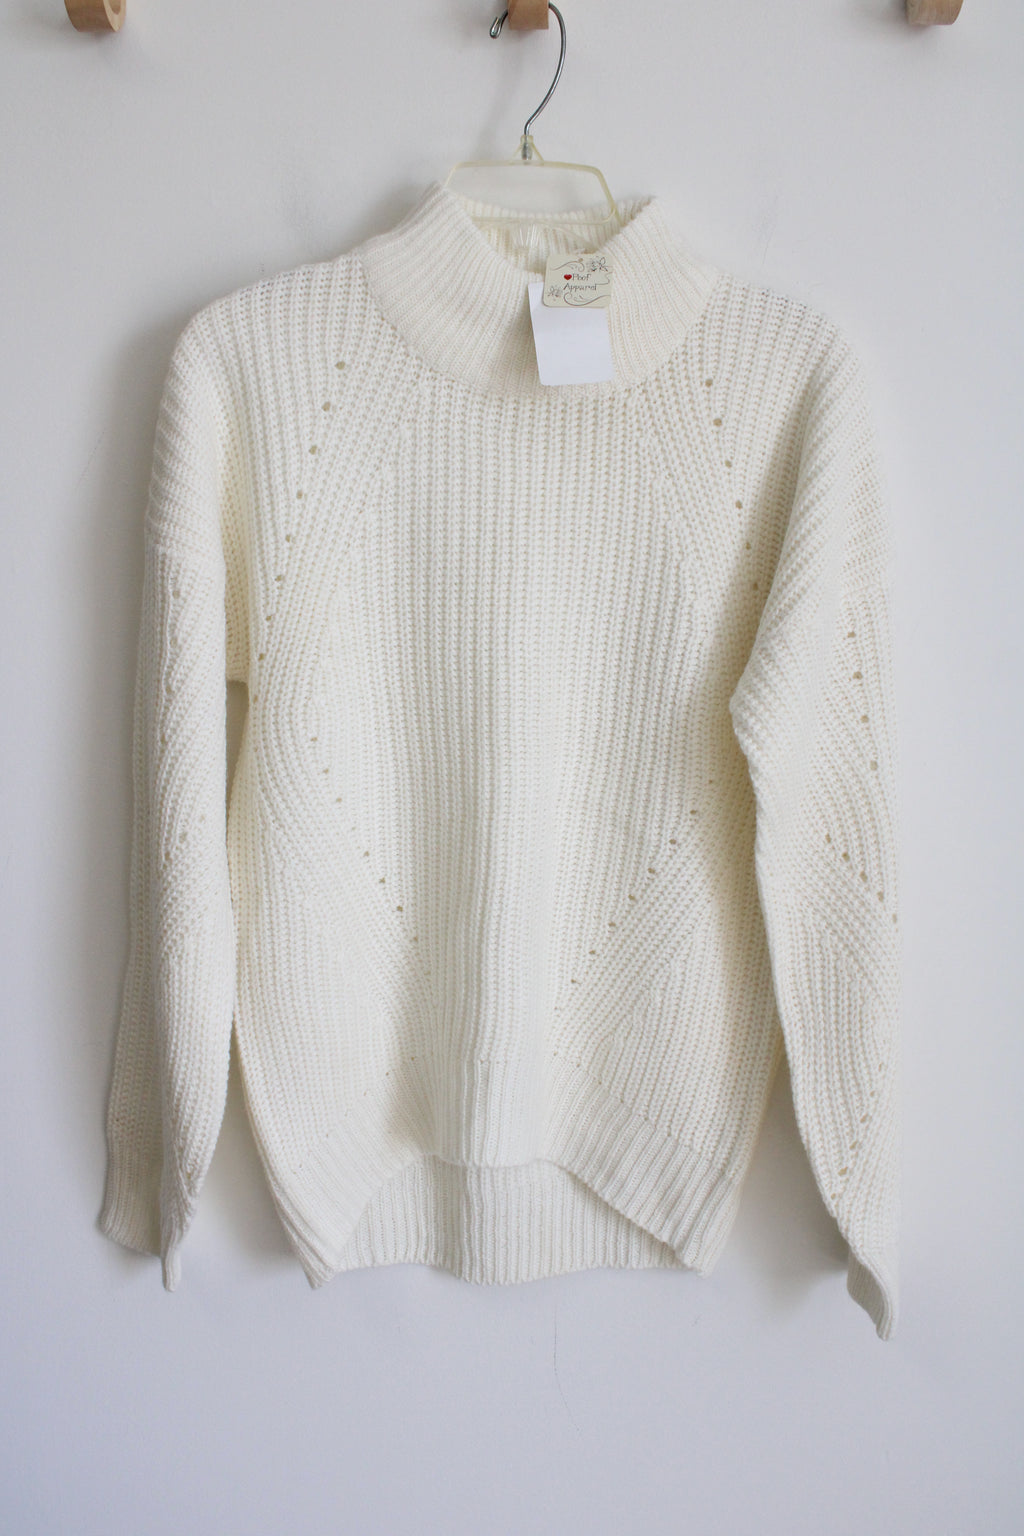 NEW Poof Apparel Cream Knit Mock Neck Sweater | M